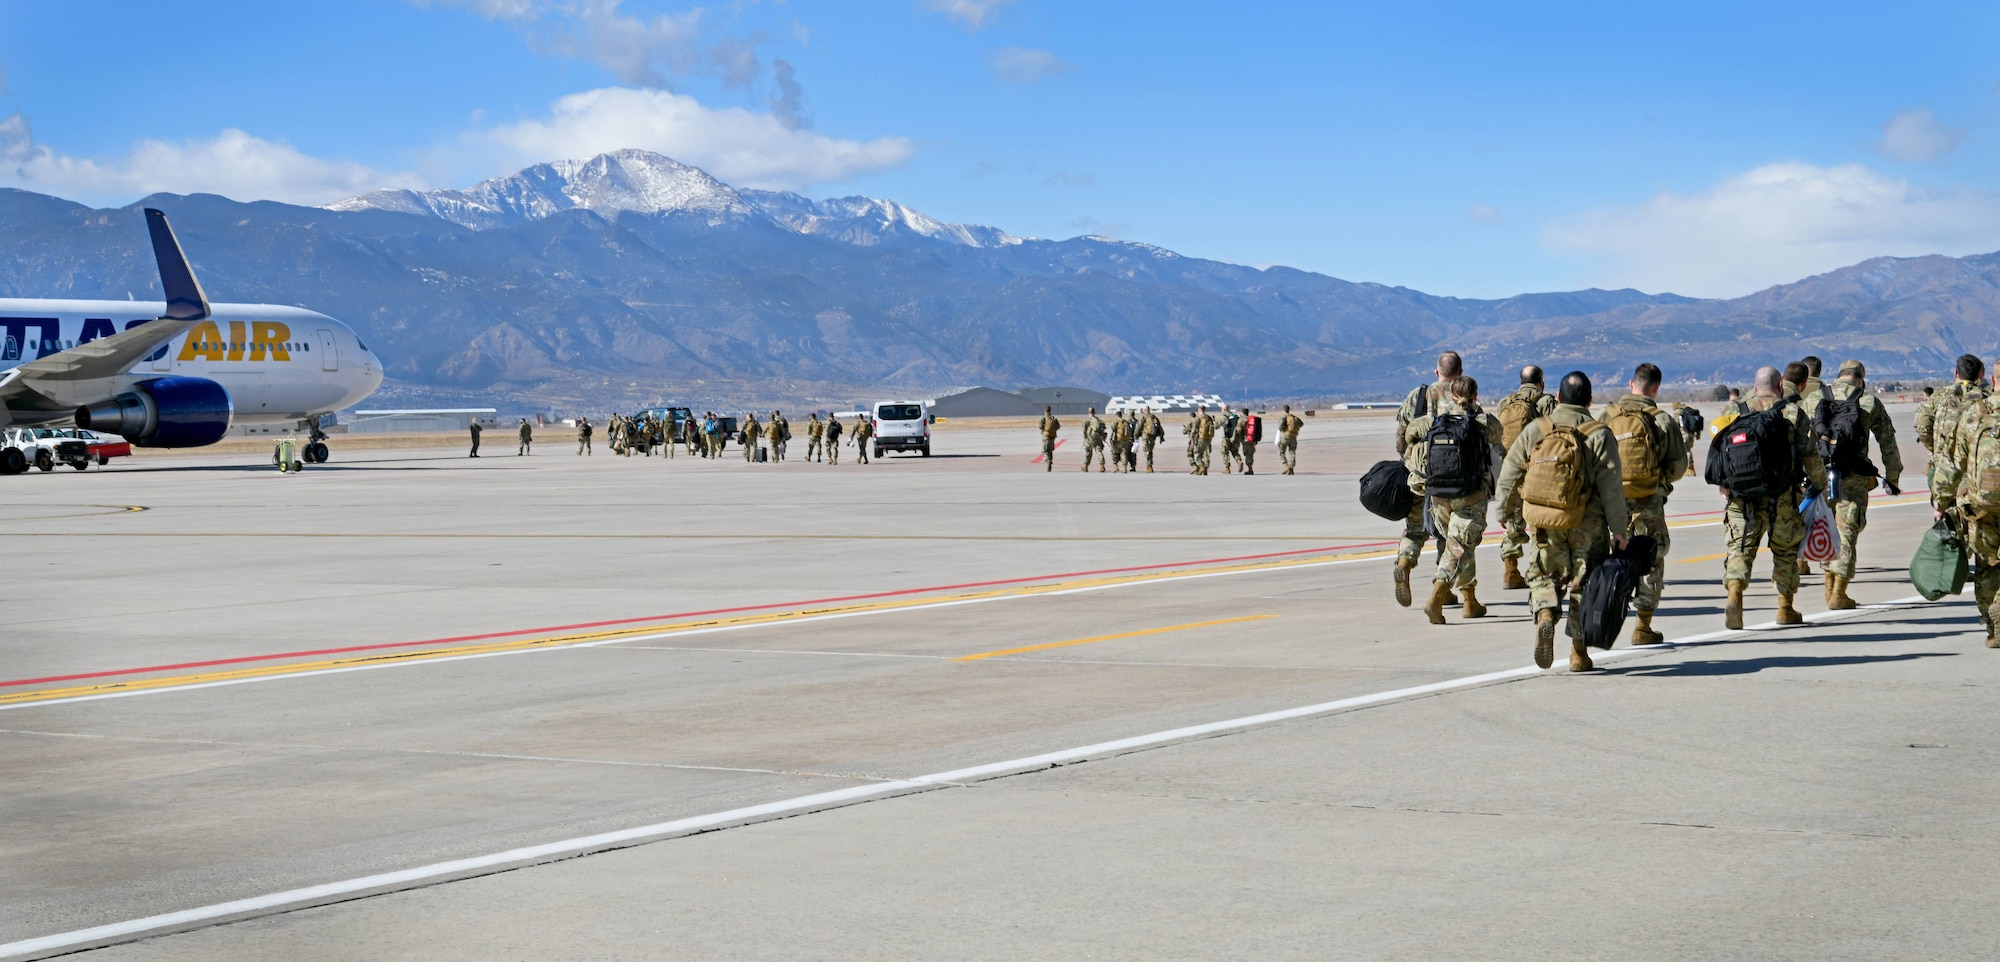 Members from the 302nd Airlift Wing prepare to board a commercial airliner after saying good-bye to coworkers, family and friends before departing to an undisclosured location Feb. 5, 2021, Peterson Air Force Base, Colorado.